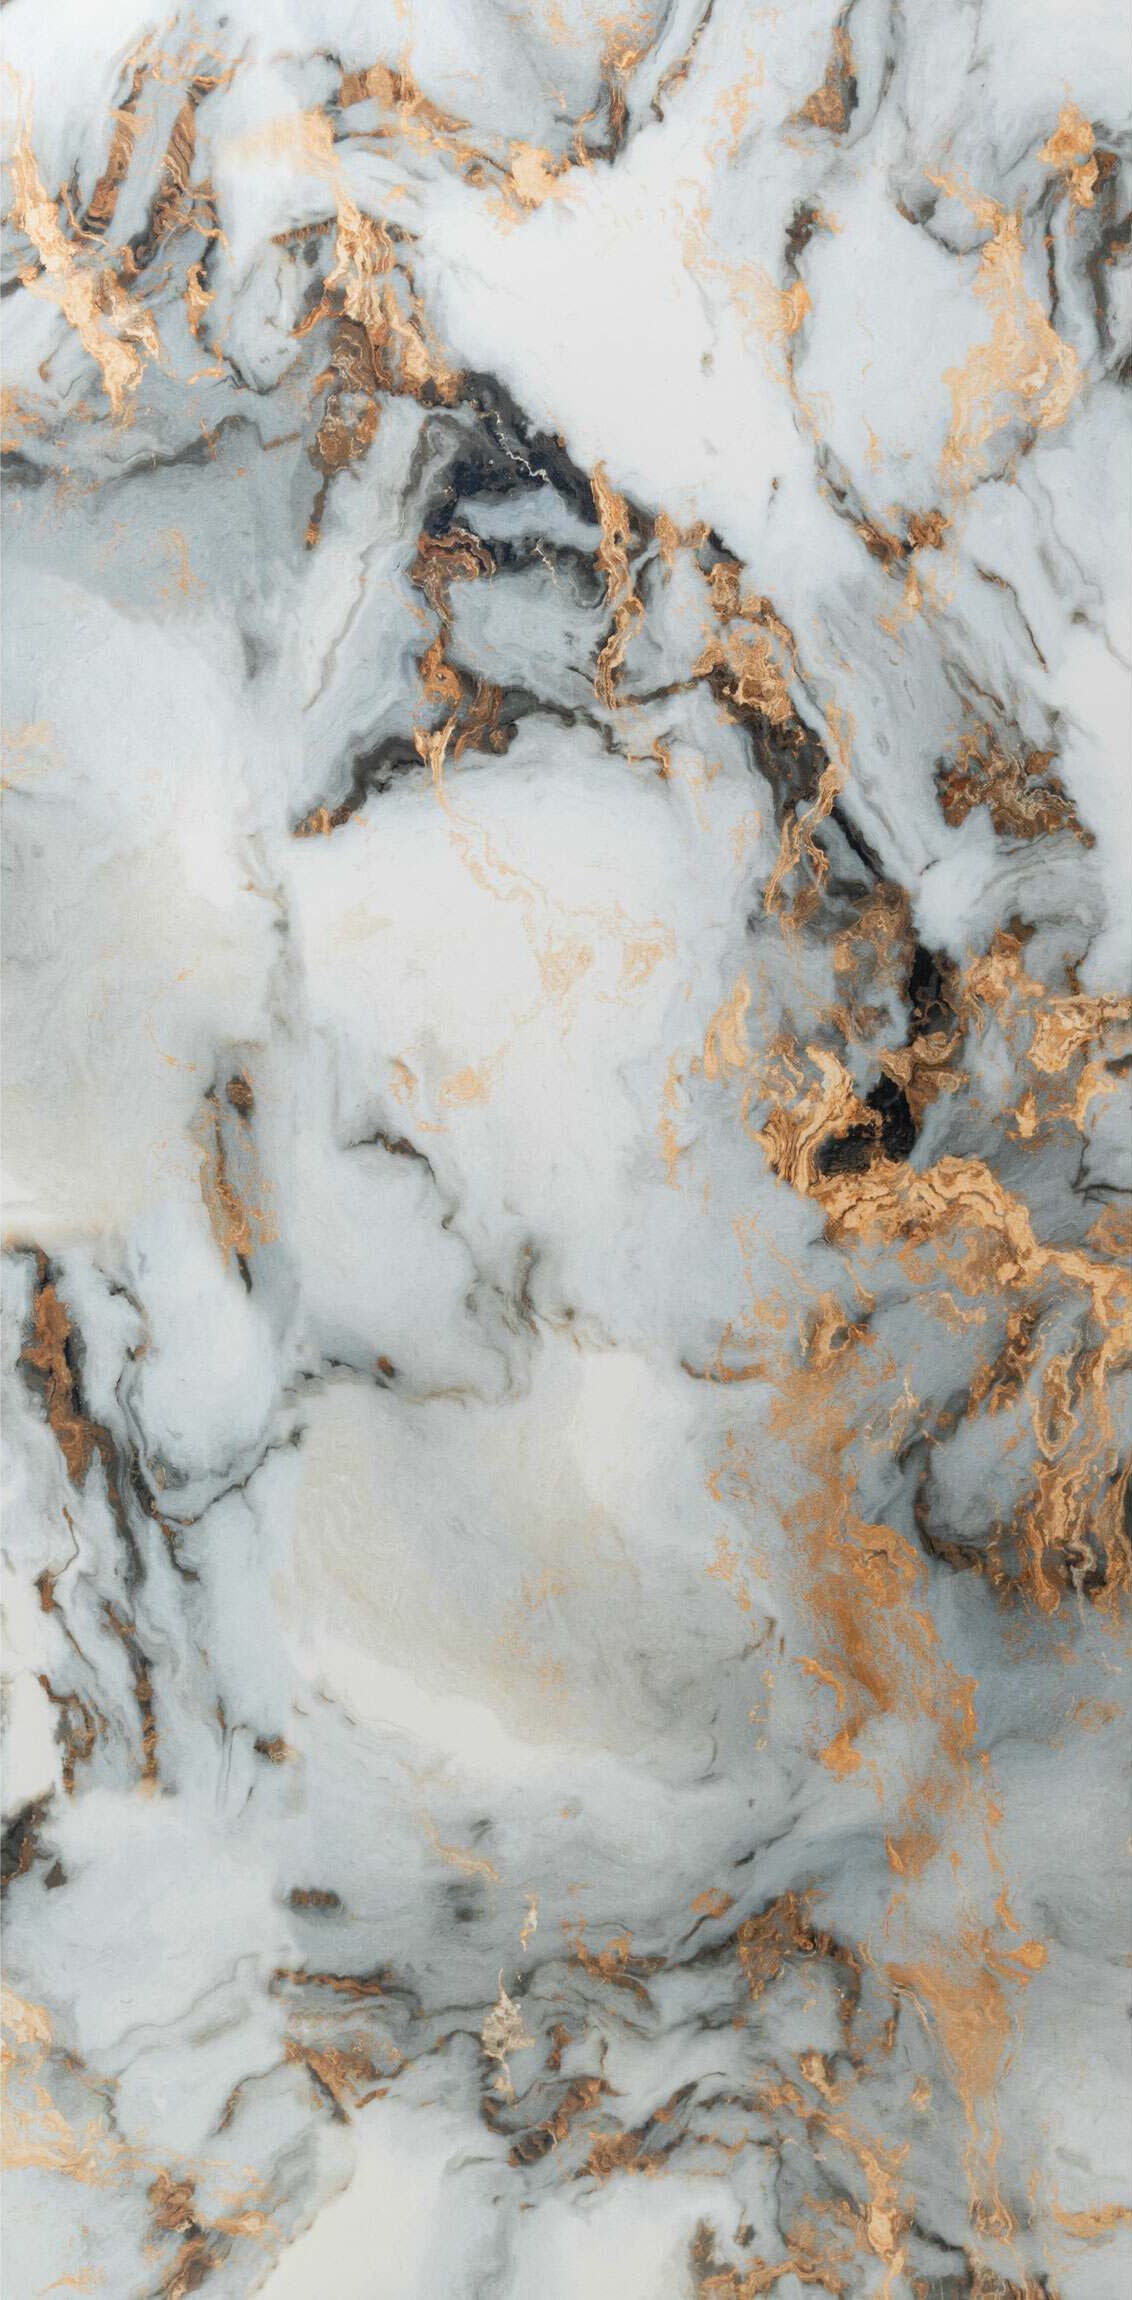 Exotica Gold Polished Porcelain 60x120cm Wall and Floor Tile